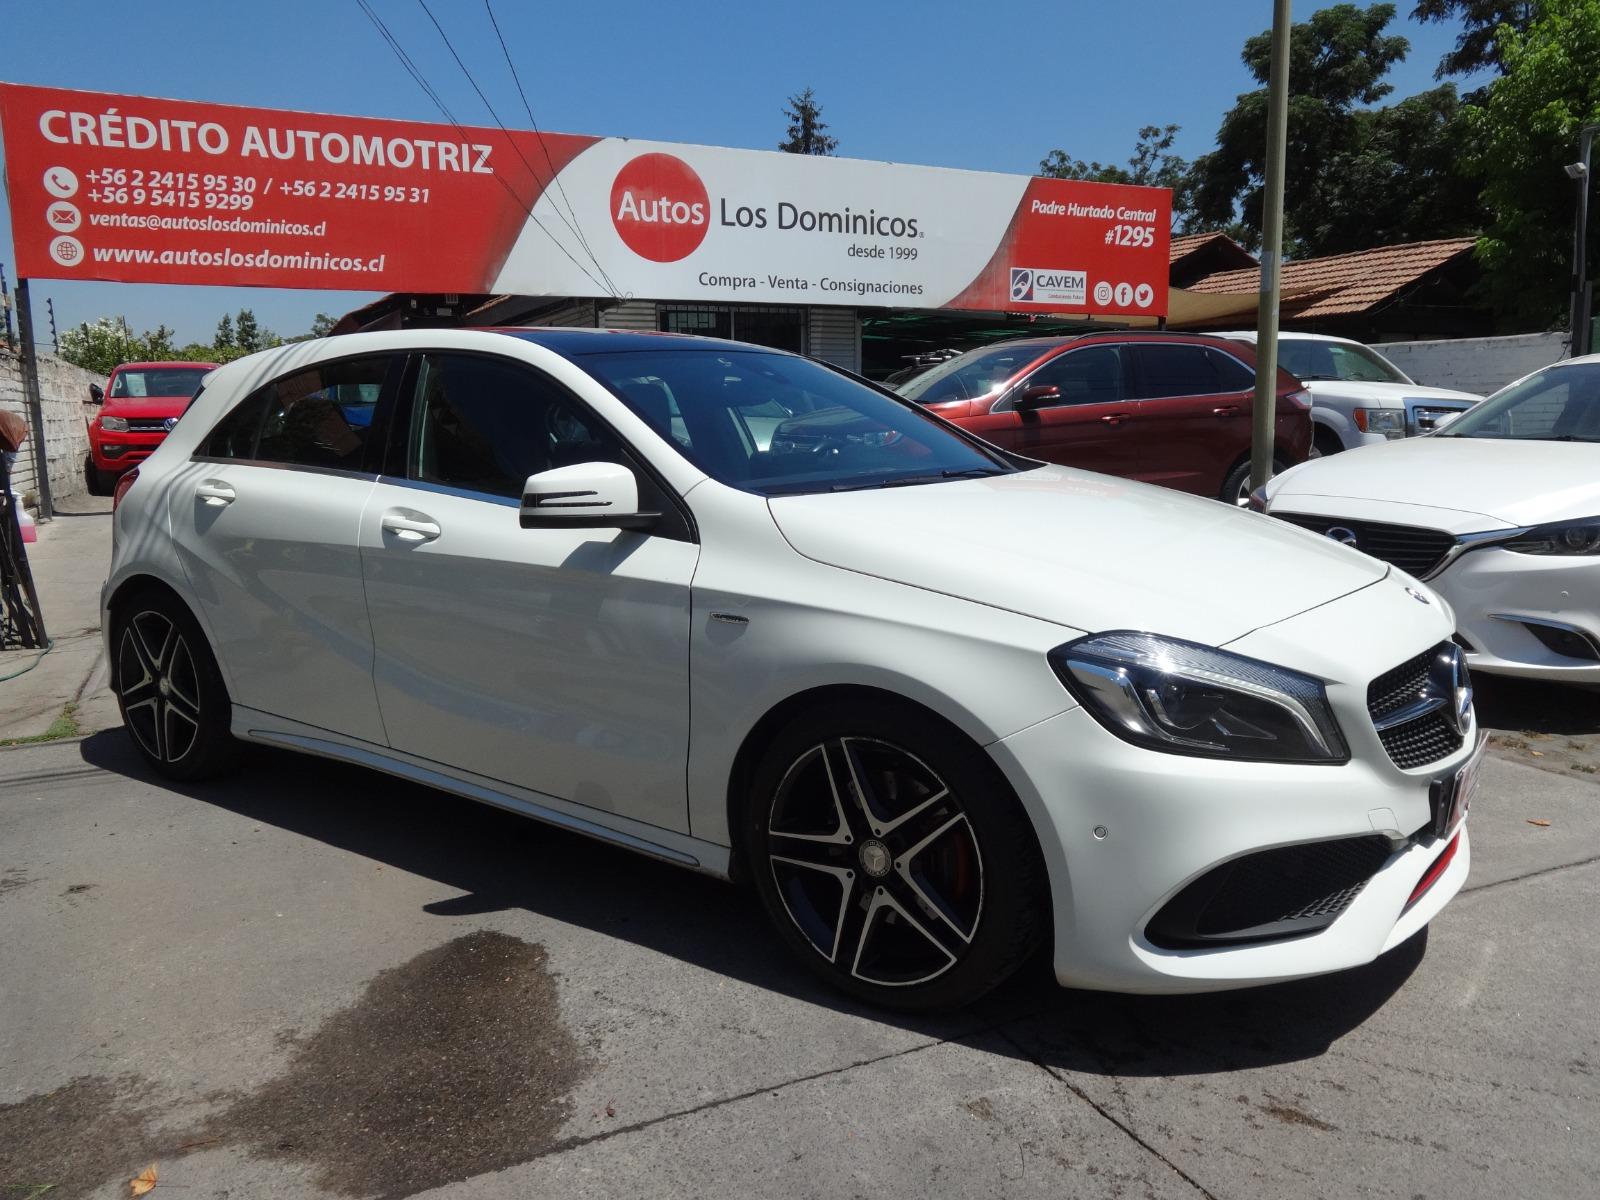 MERCEDES-BENZ A250 SPORT 2.0 AUT SOLO 60.000 KM  2016 FULL CarPlay TECHO PANORÁMICO AIRE AIRBAG ABS CAMA - AUTOS LOS DOMINICOS